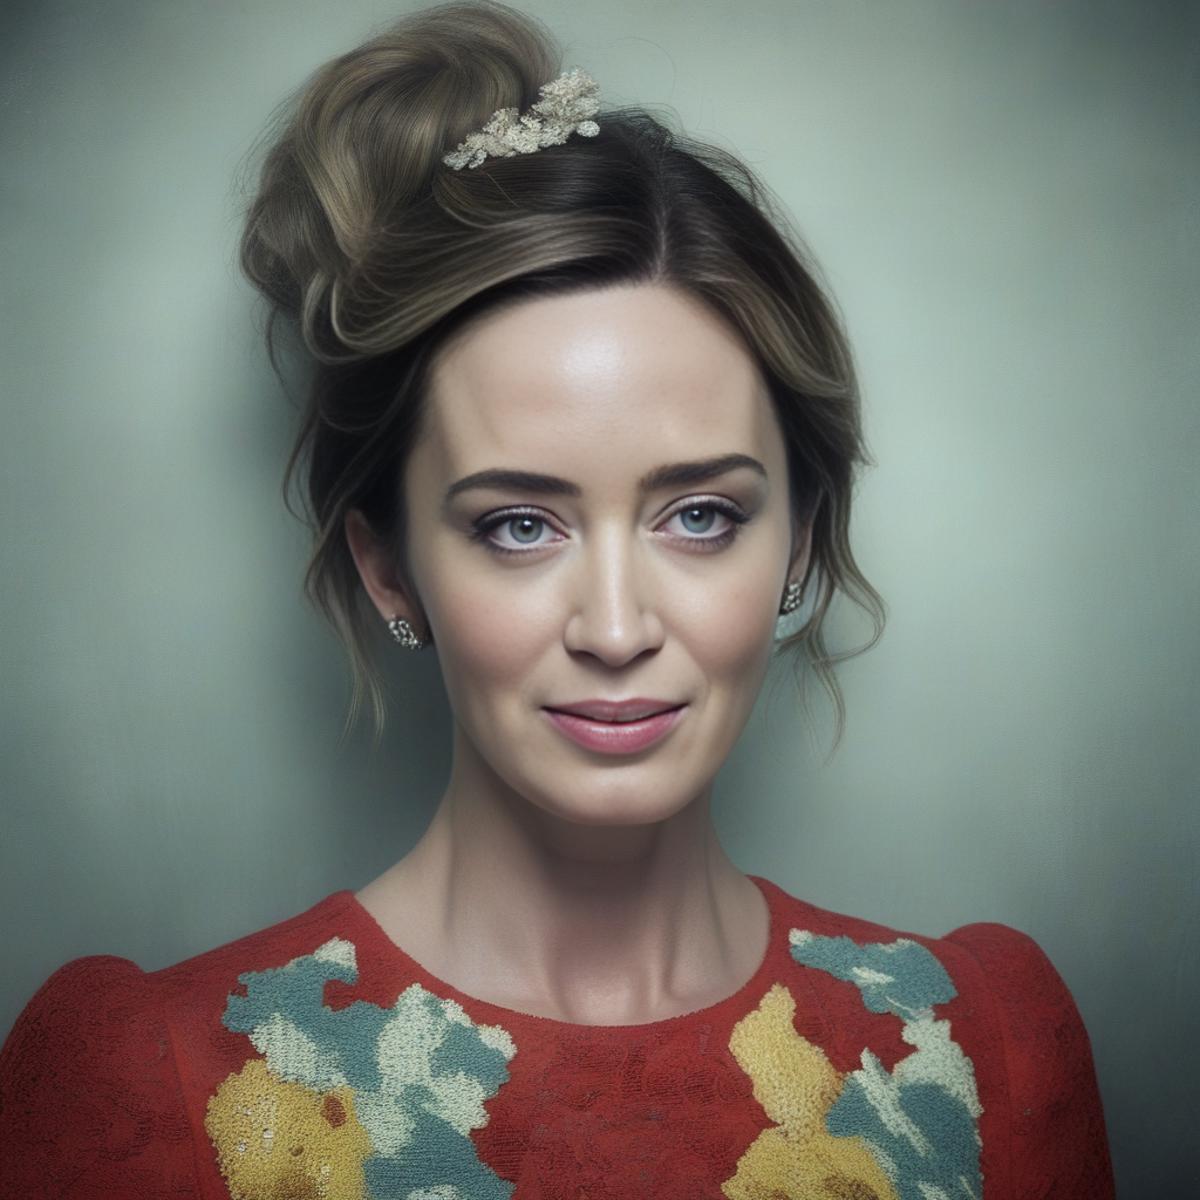 Emily Blunt image by parar20